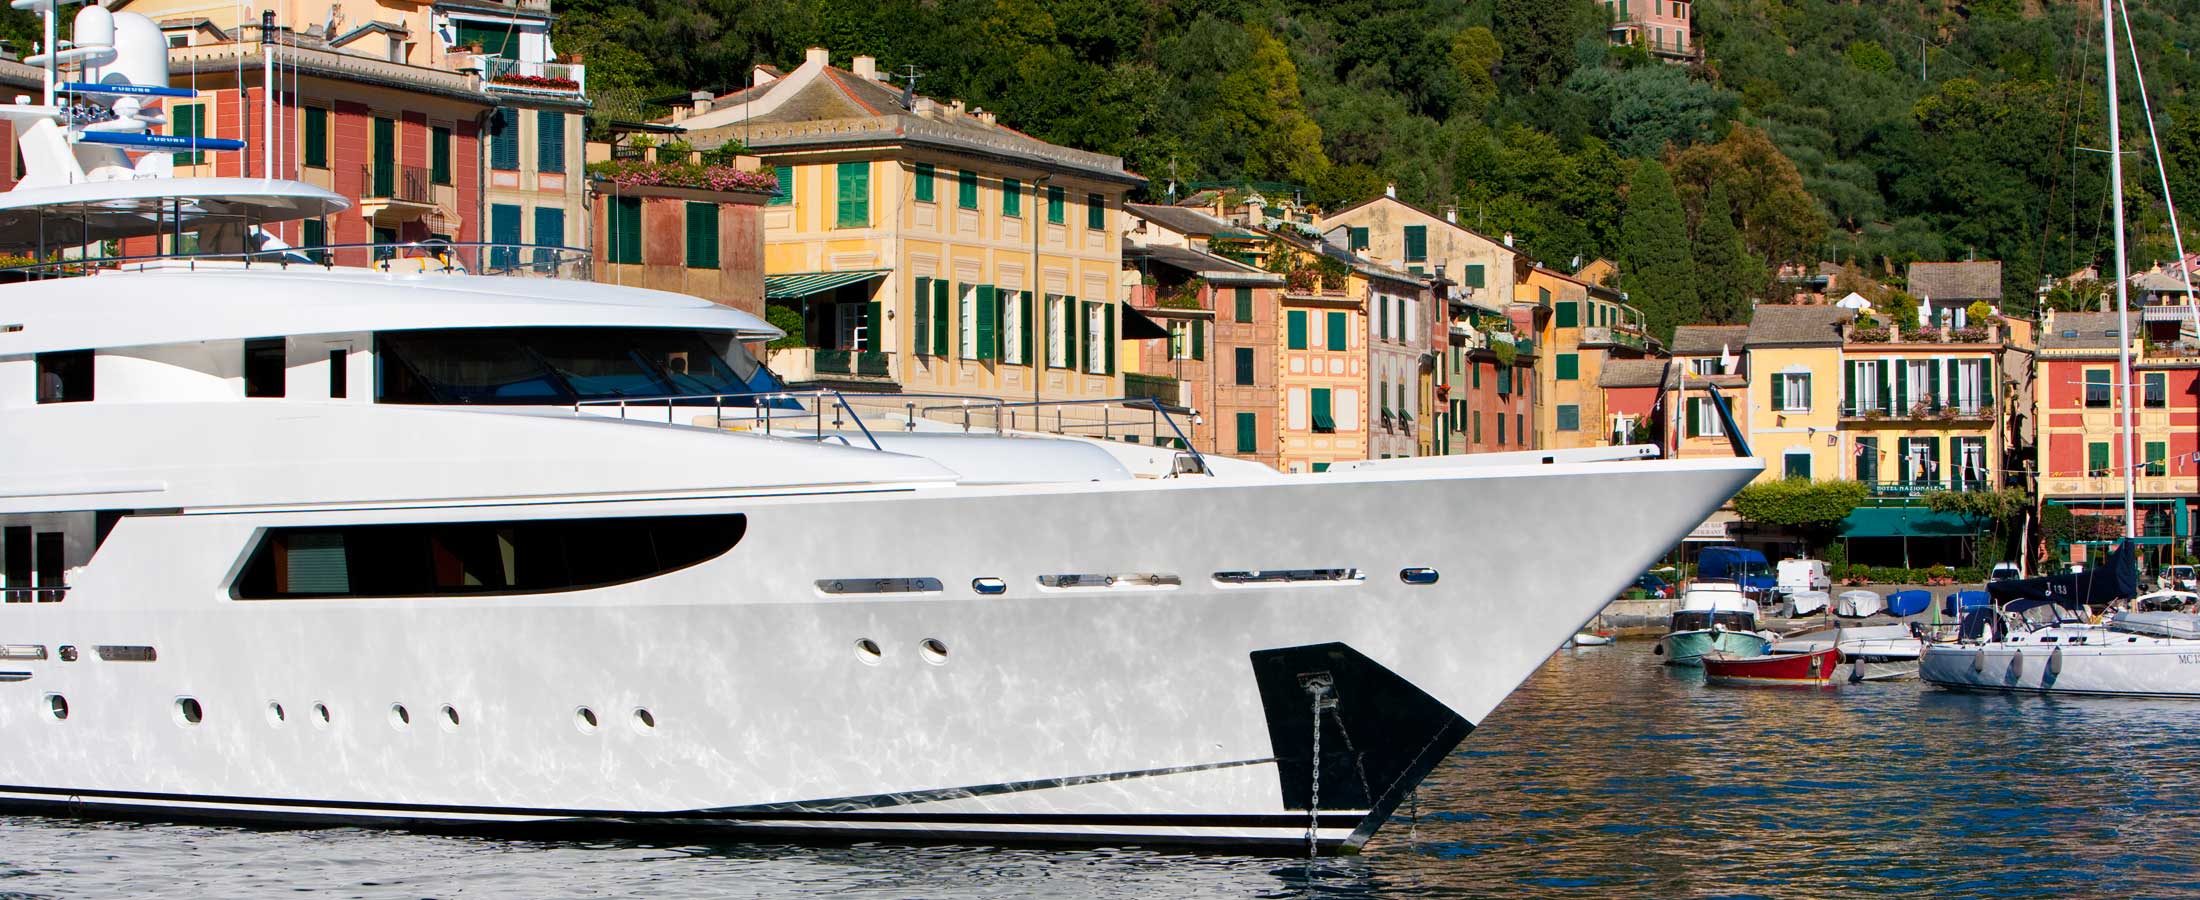 Yachts Sold - Cross Section of Yacht Sales | Westport Yachts